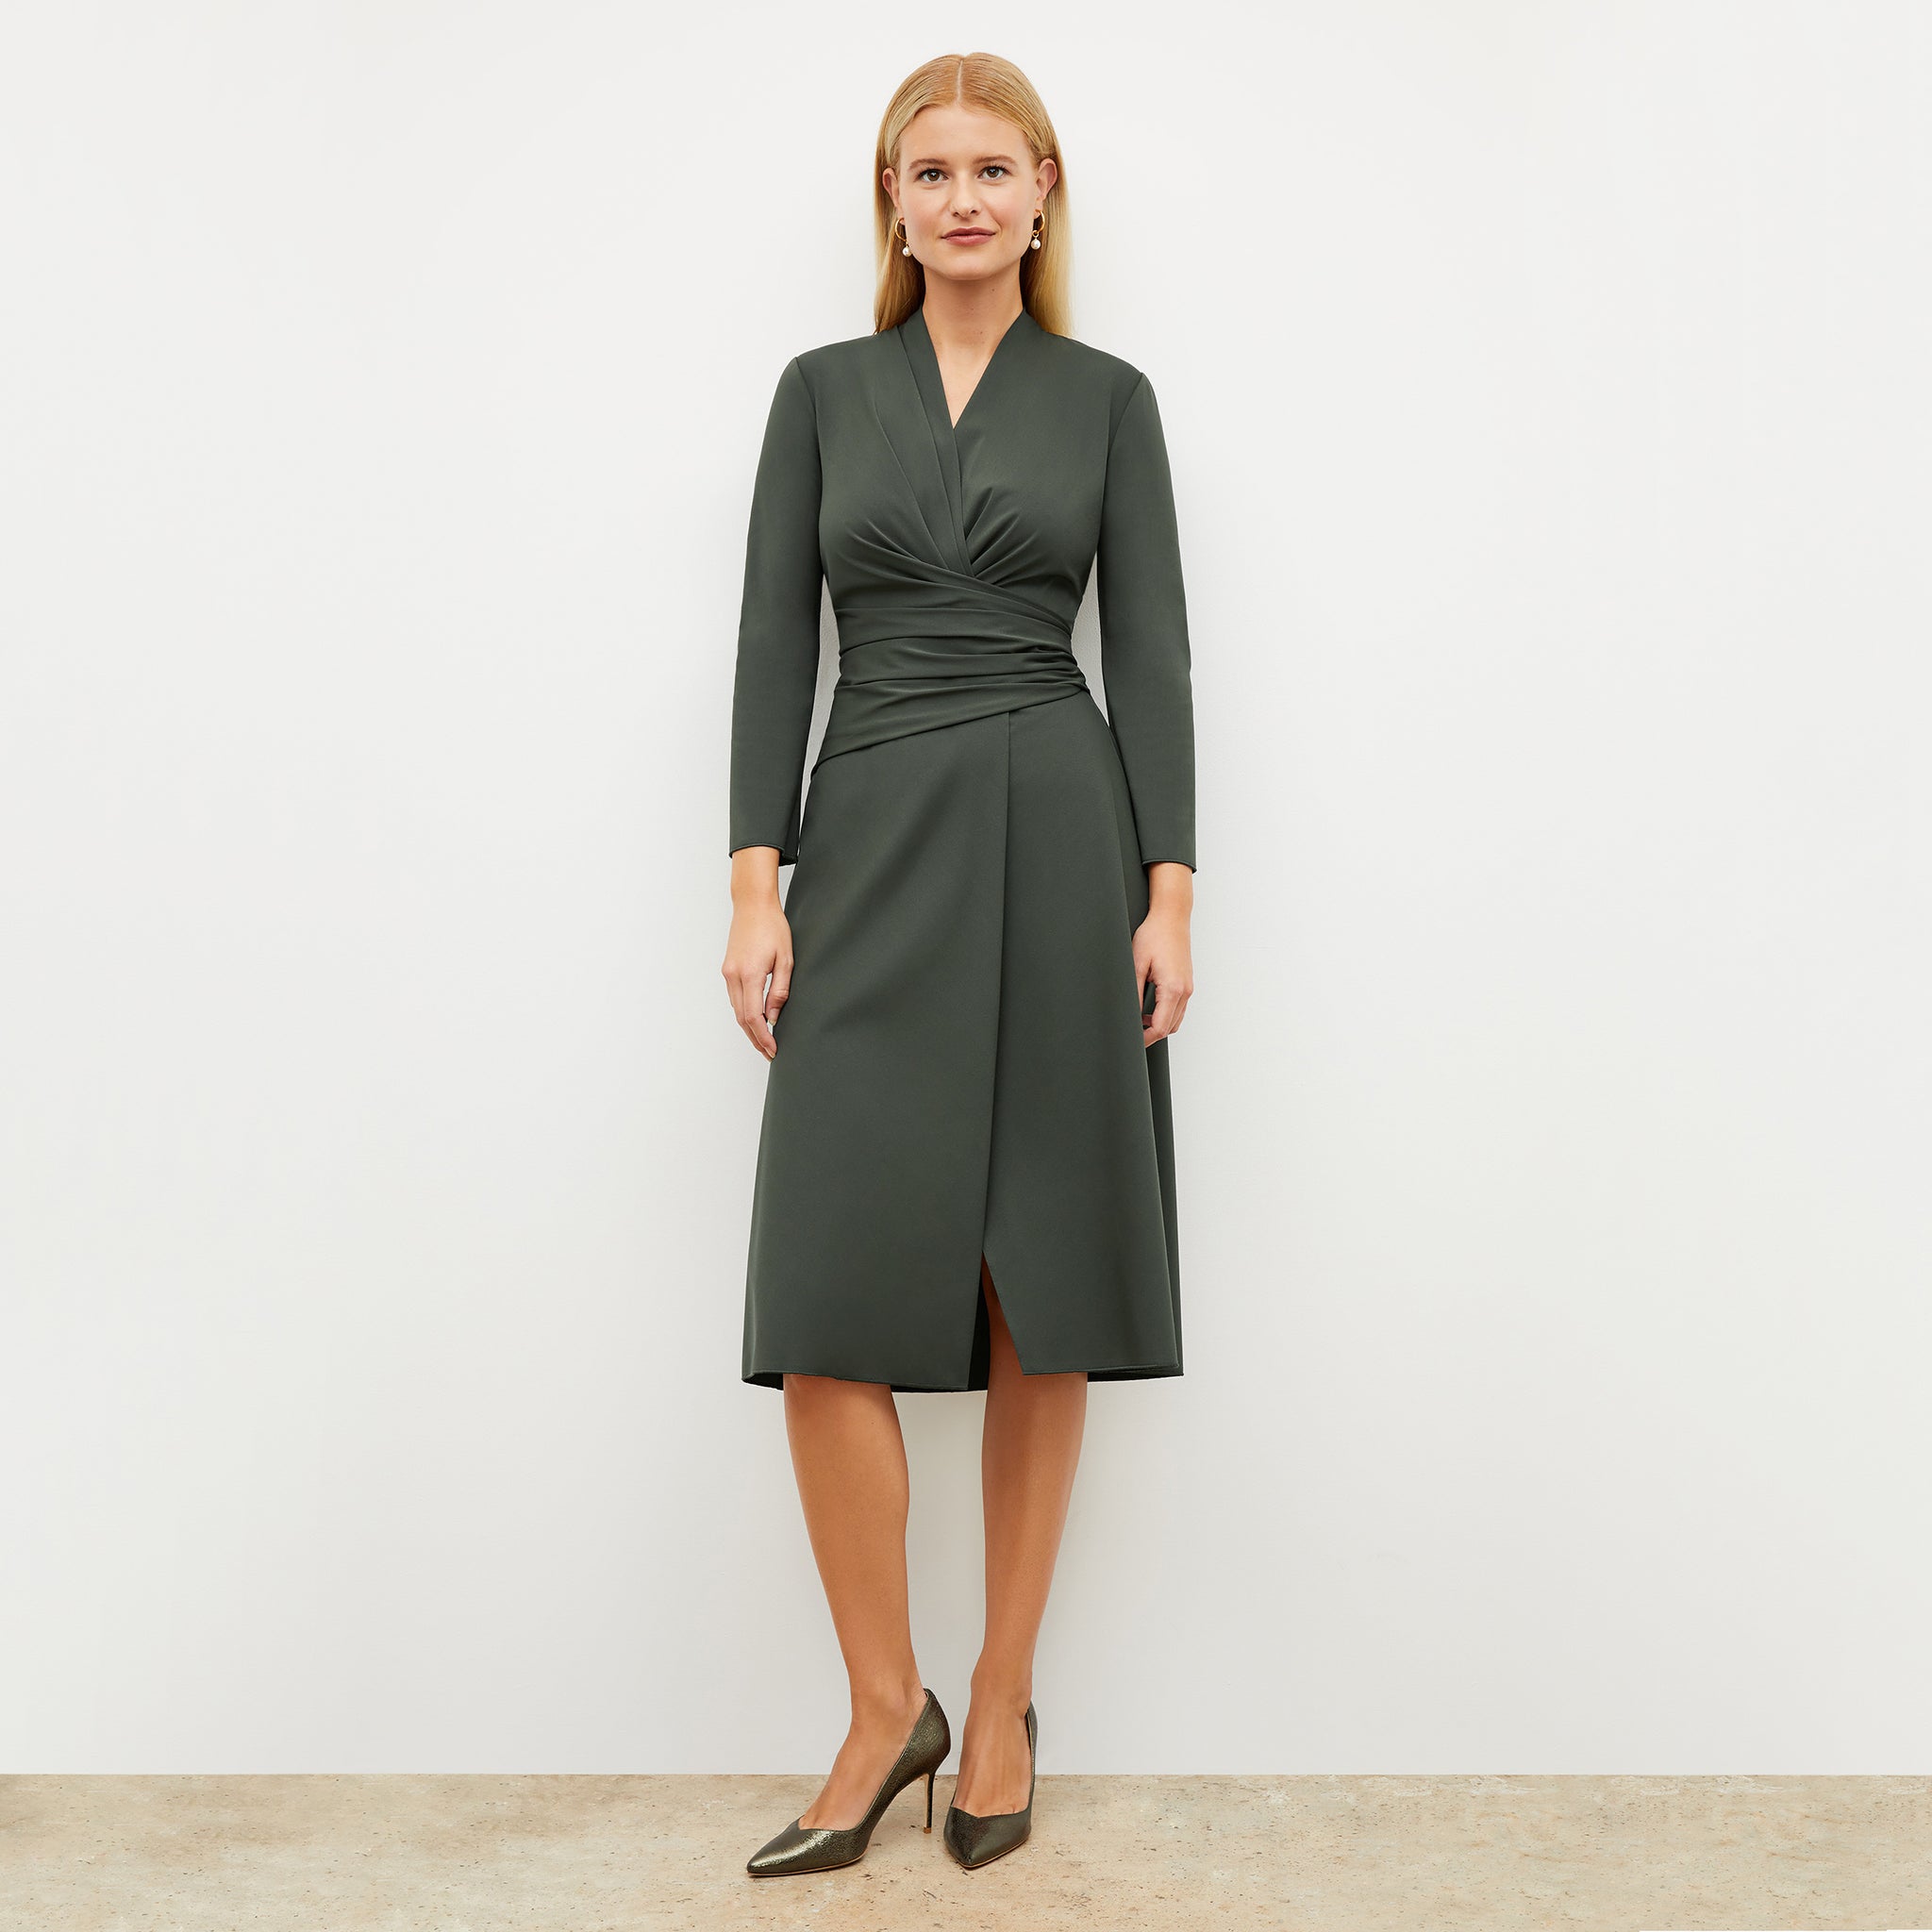 Image of a woman wearing the Carly Dress in Dark Aloe 